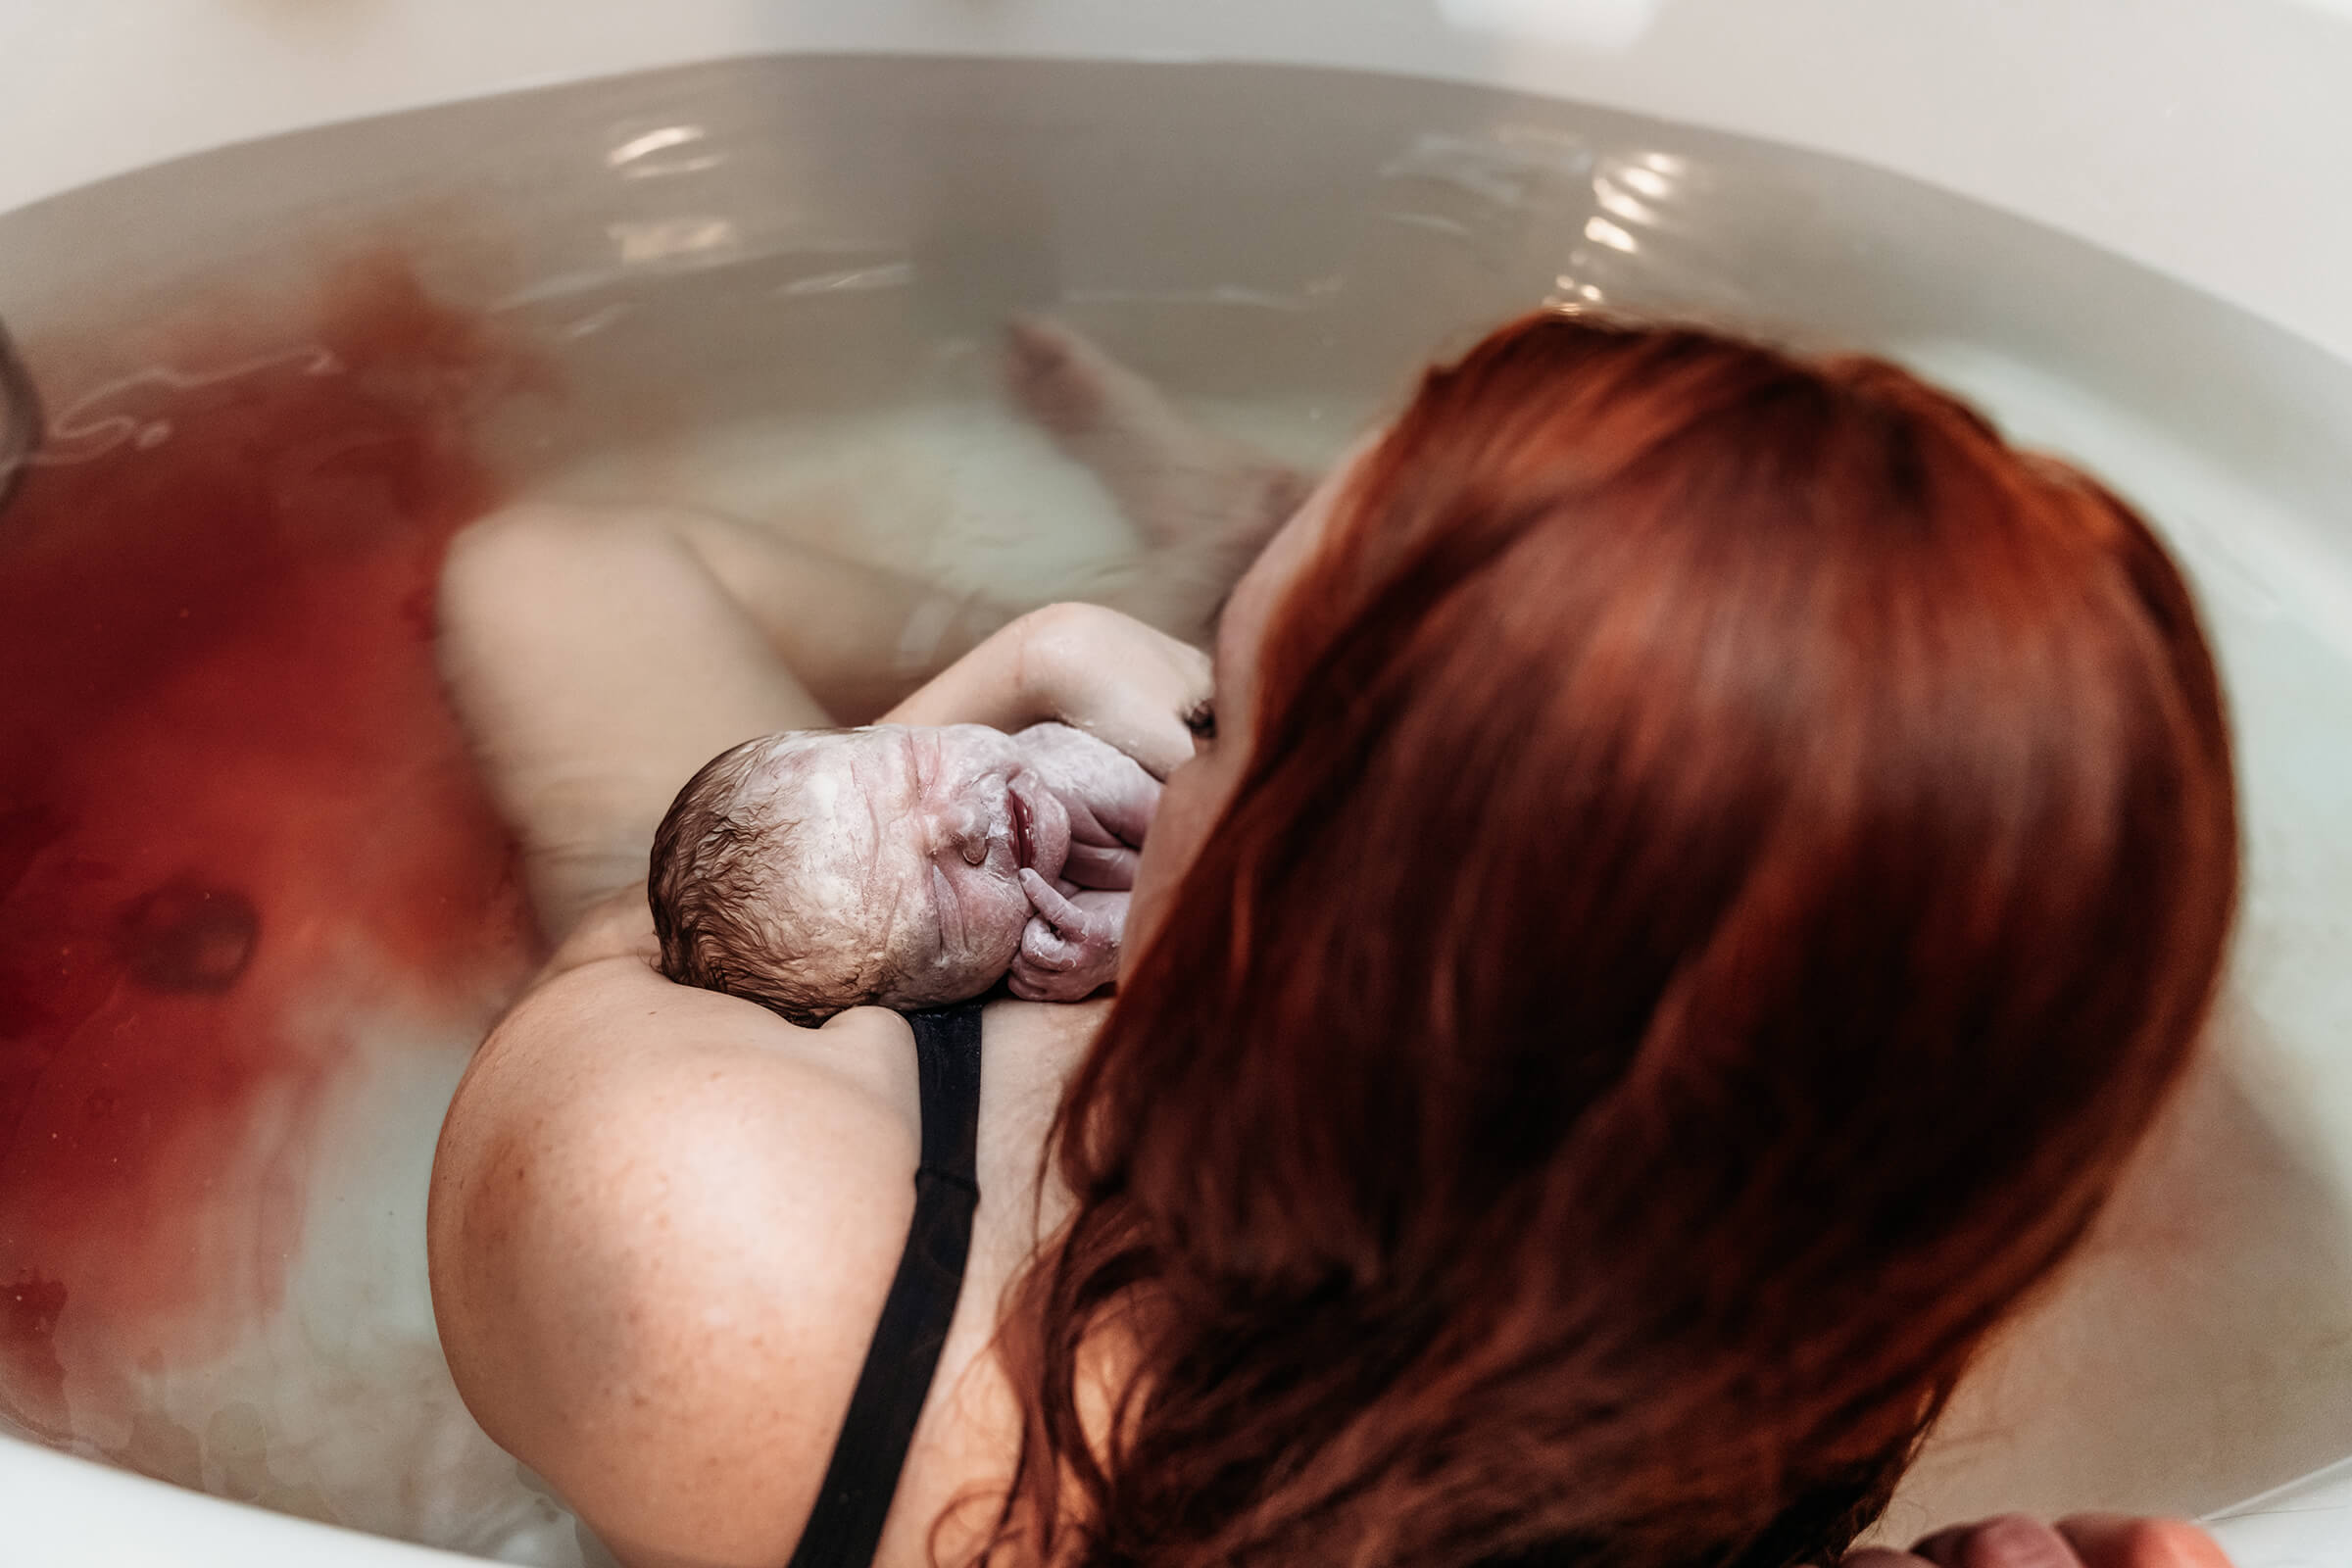 A water birth at Serenity Birth Center in Las Vegas